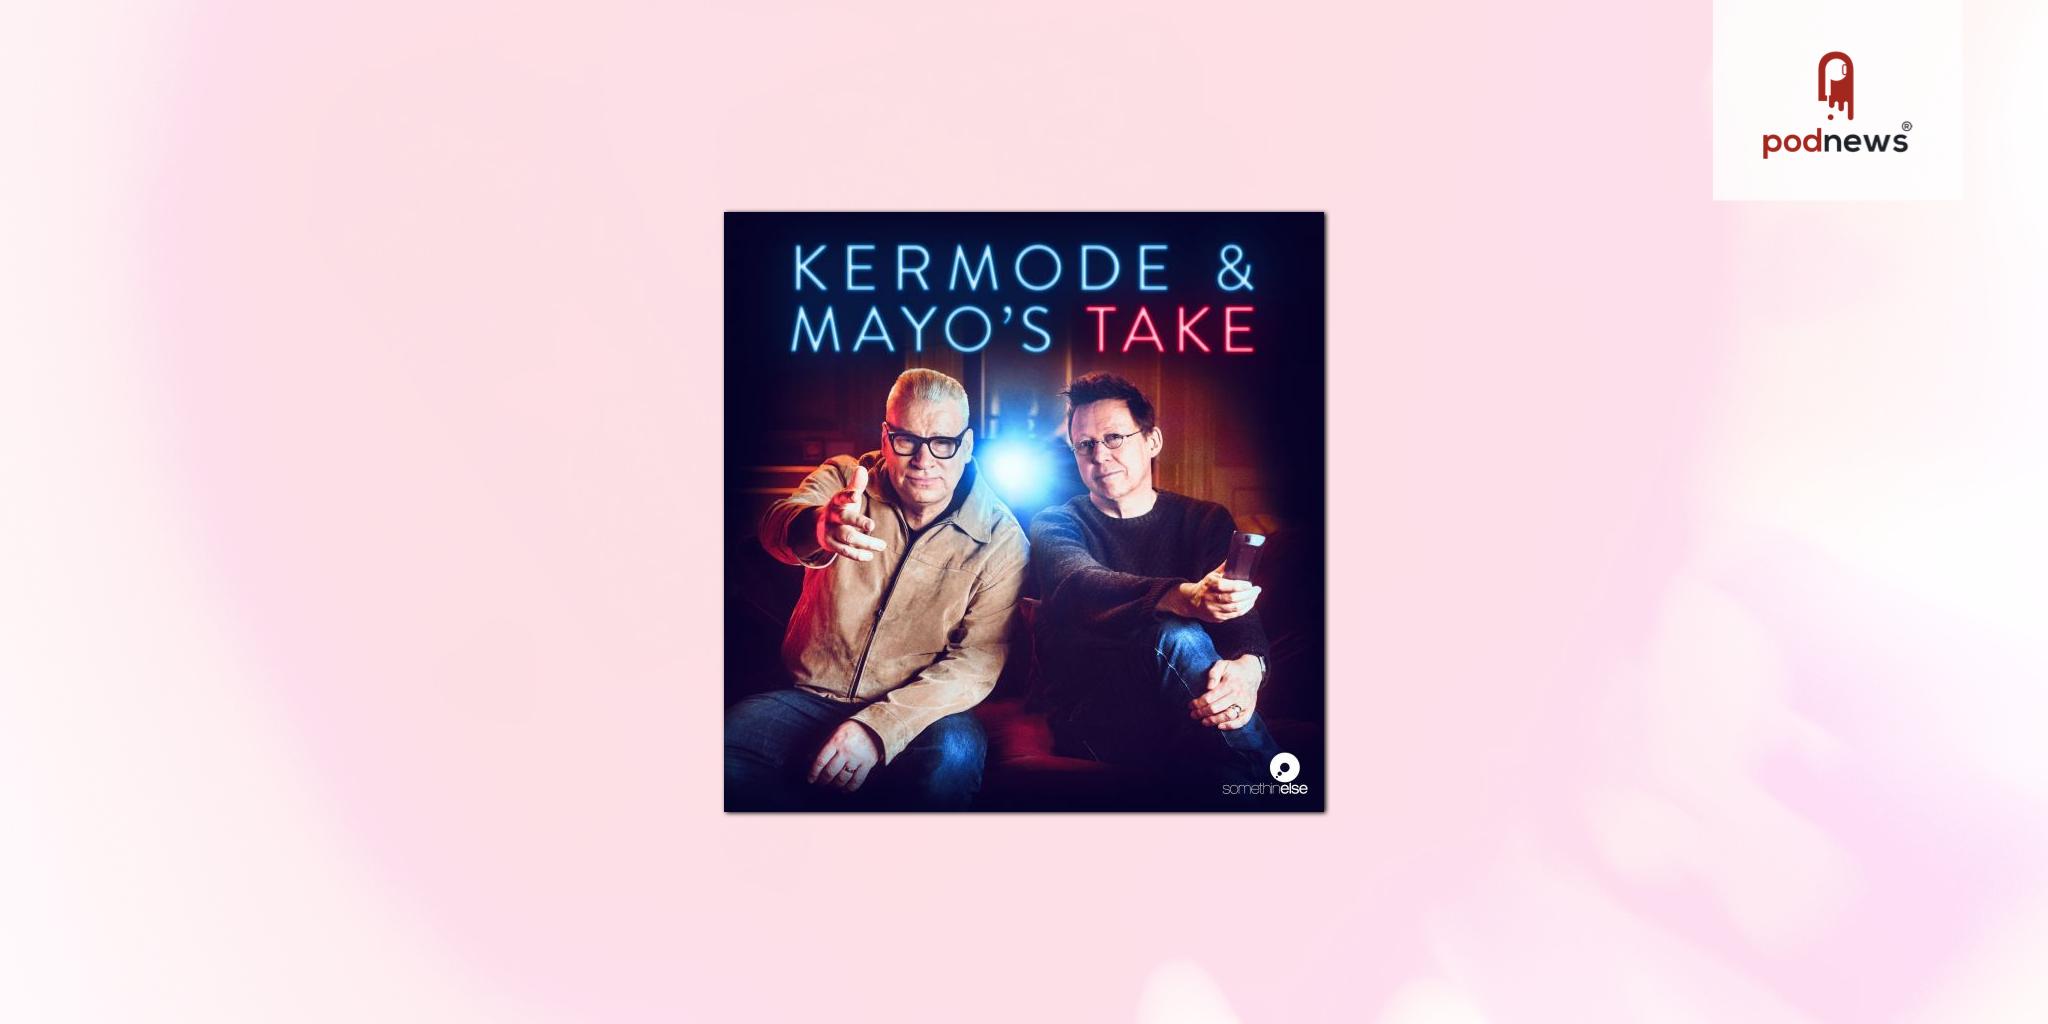 Kermode and Mayo's Take debuts as most popular subscription on Apple Podcasts in the UK